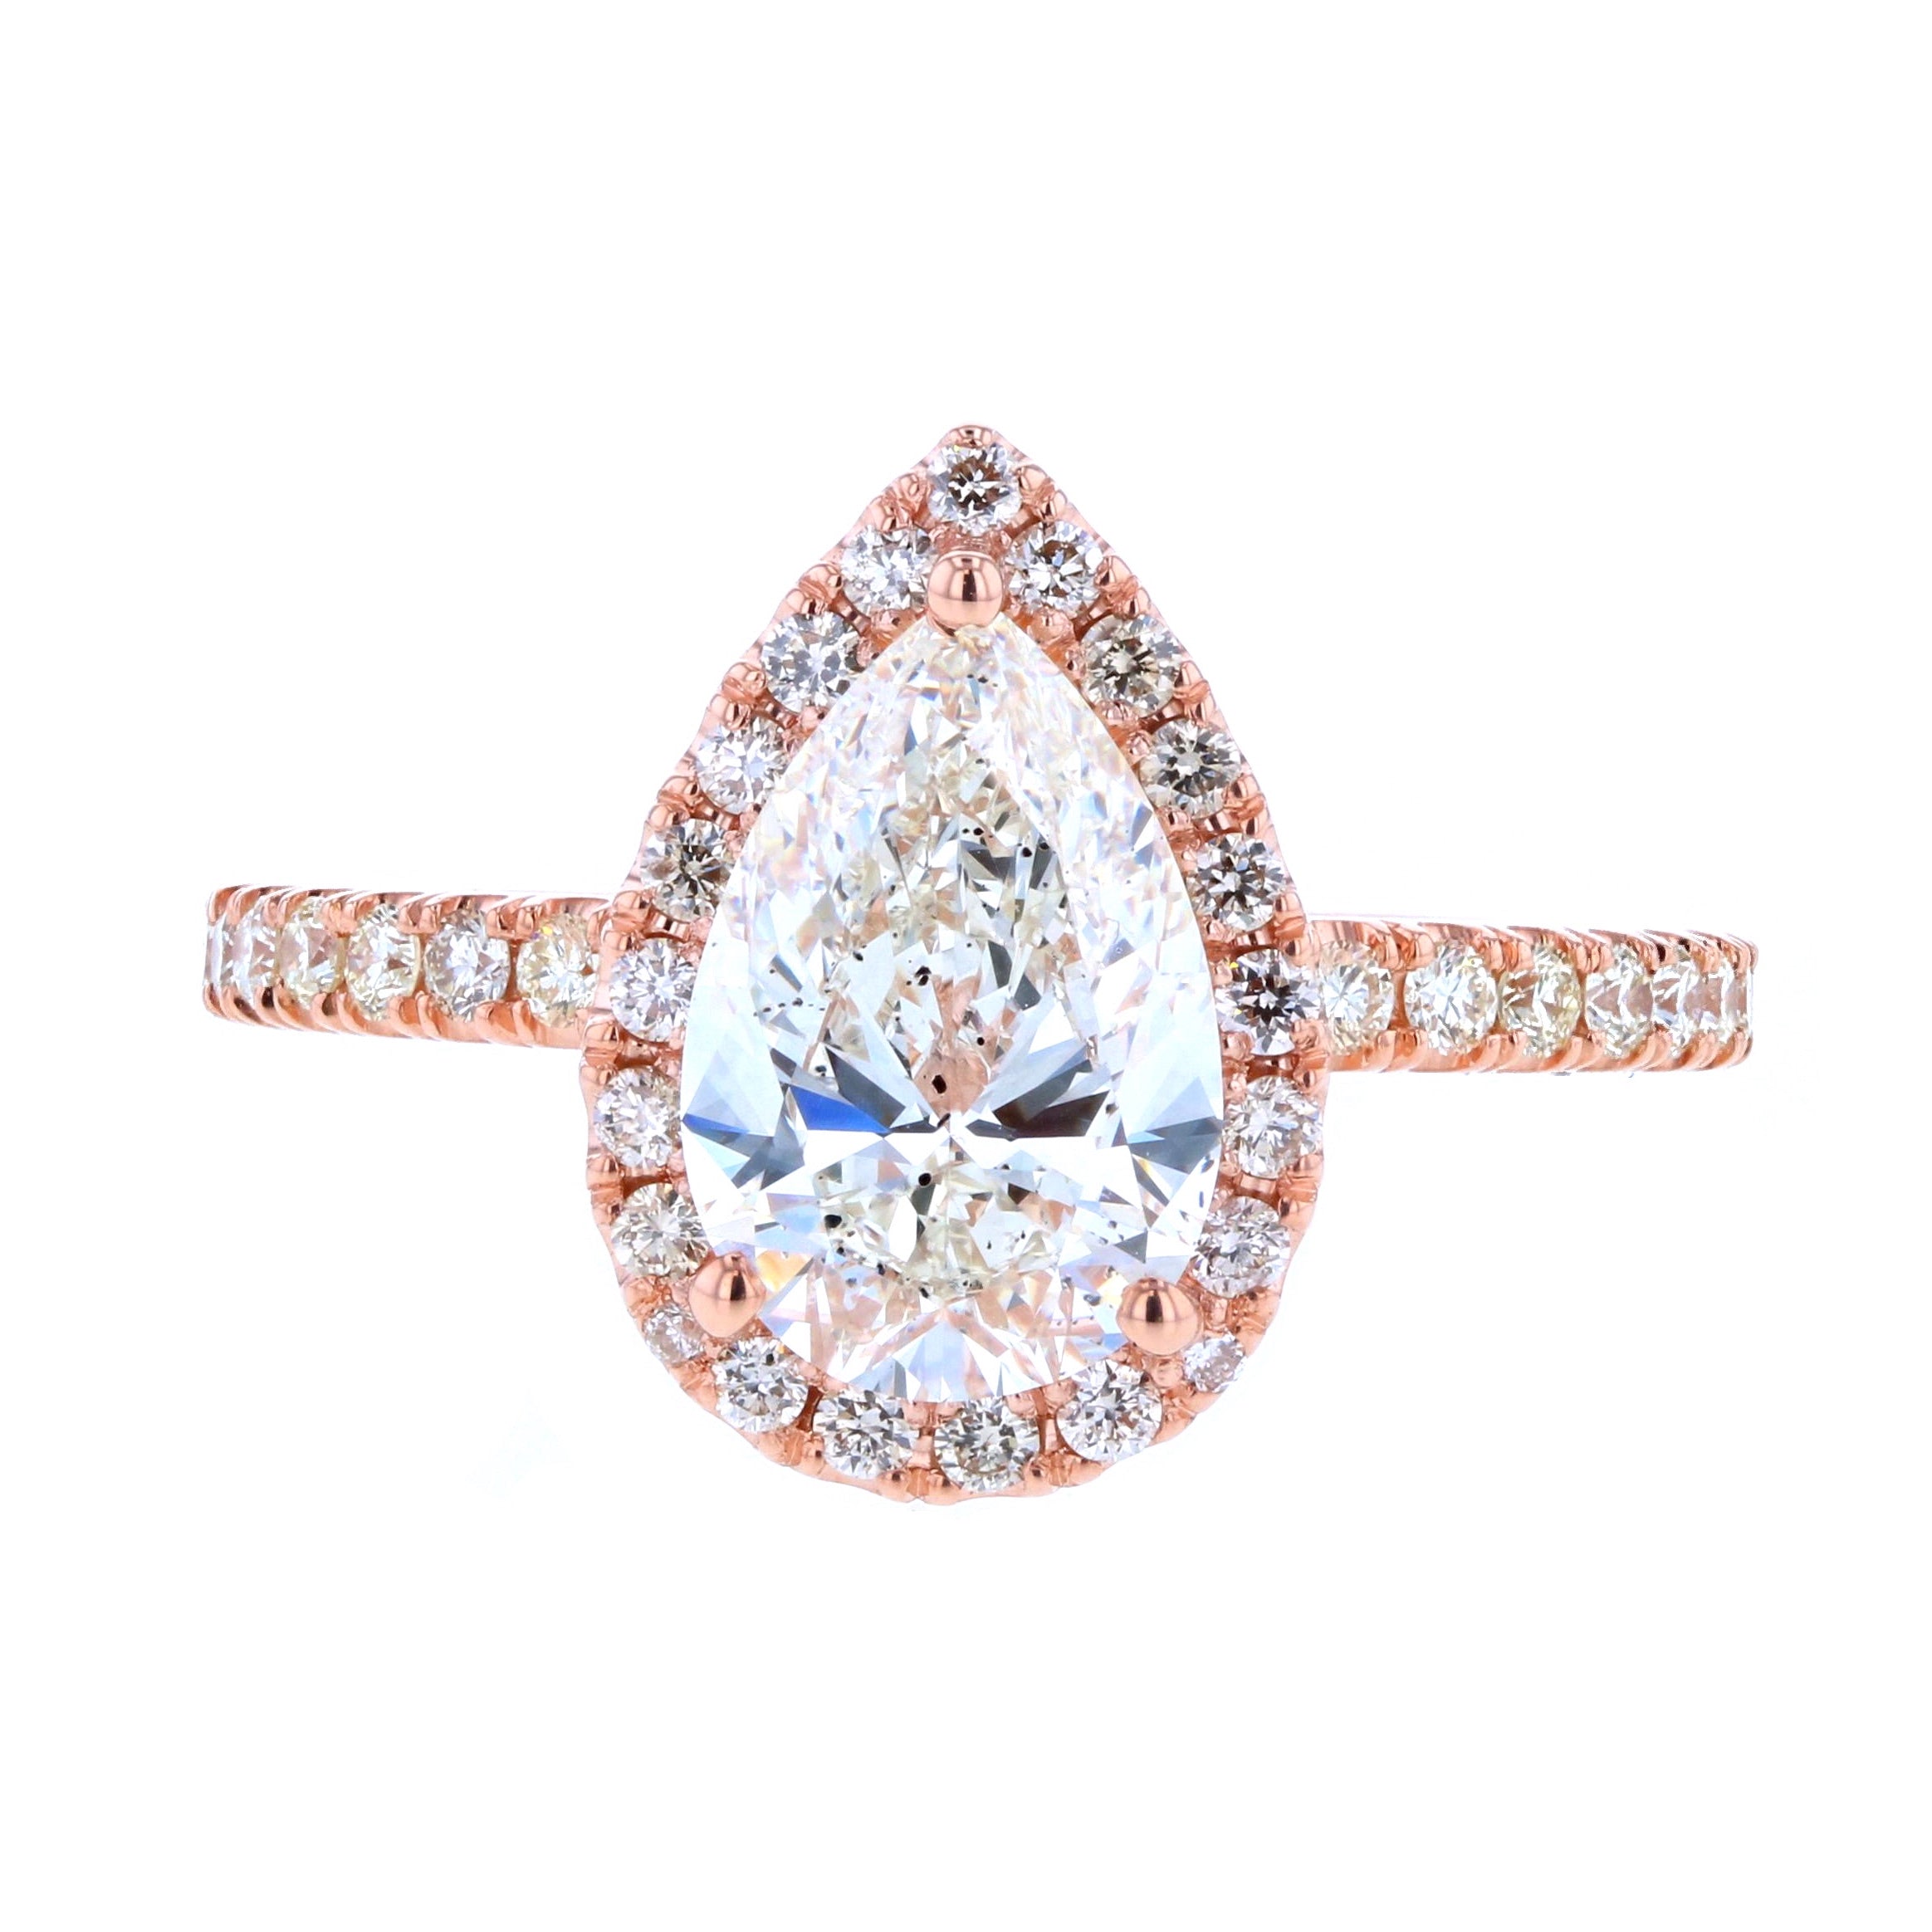 Pear Shaped Diamond Engagement Ring with Diamond Halo in Rose Gold